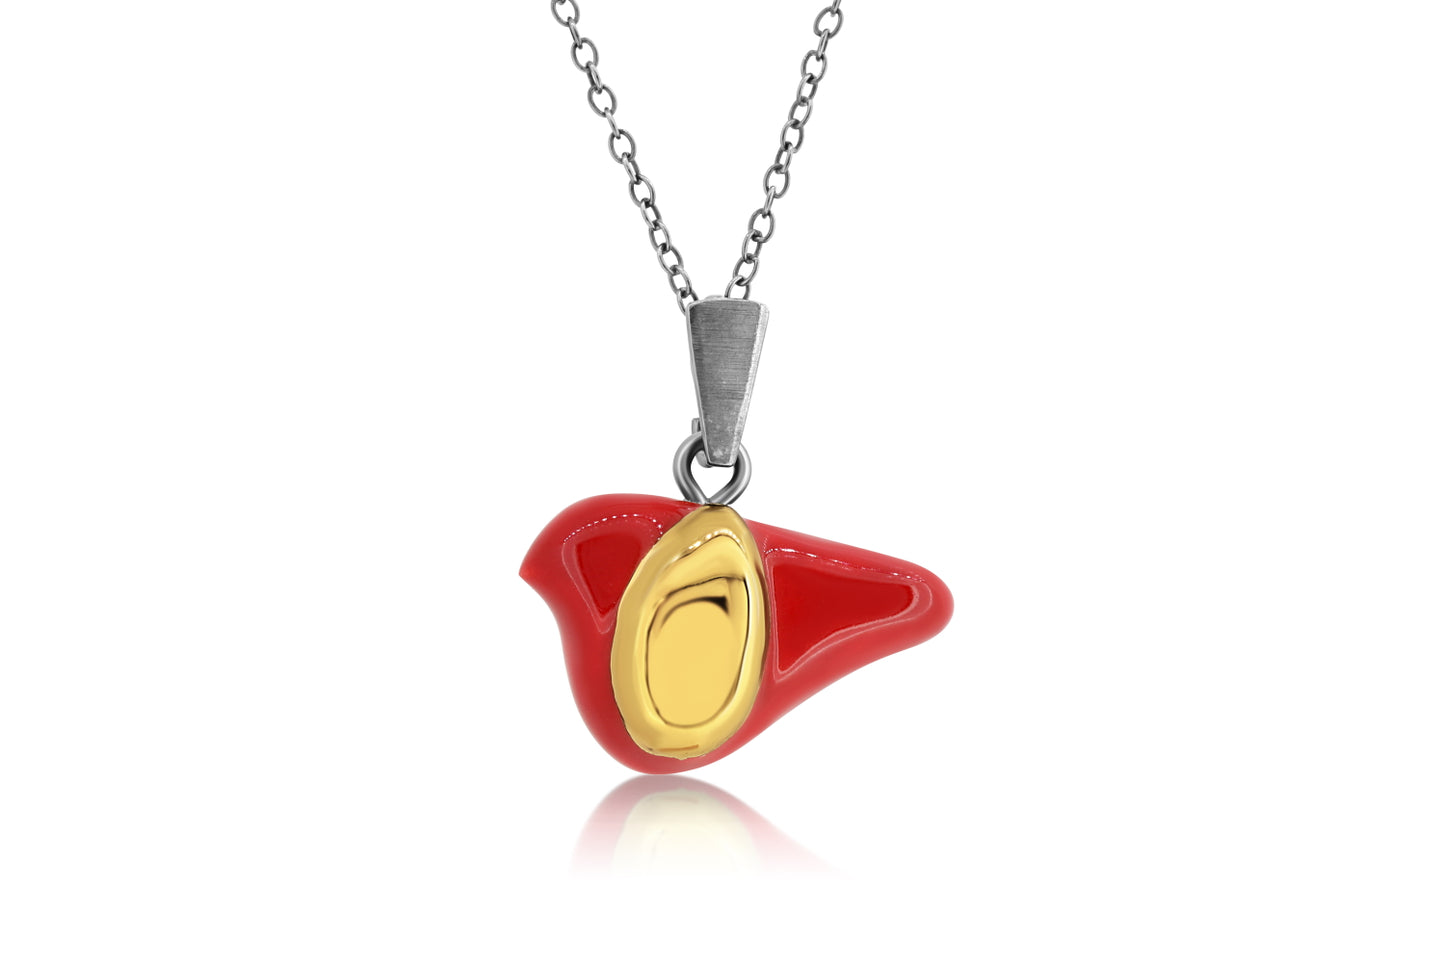 Red bird necklace···gold dipped